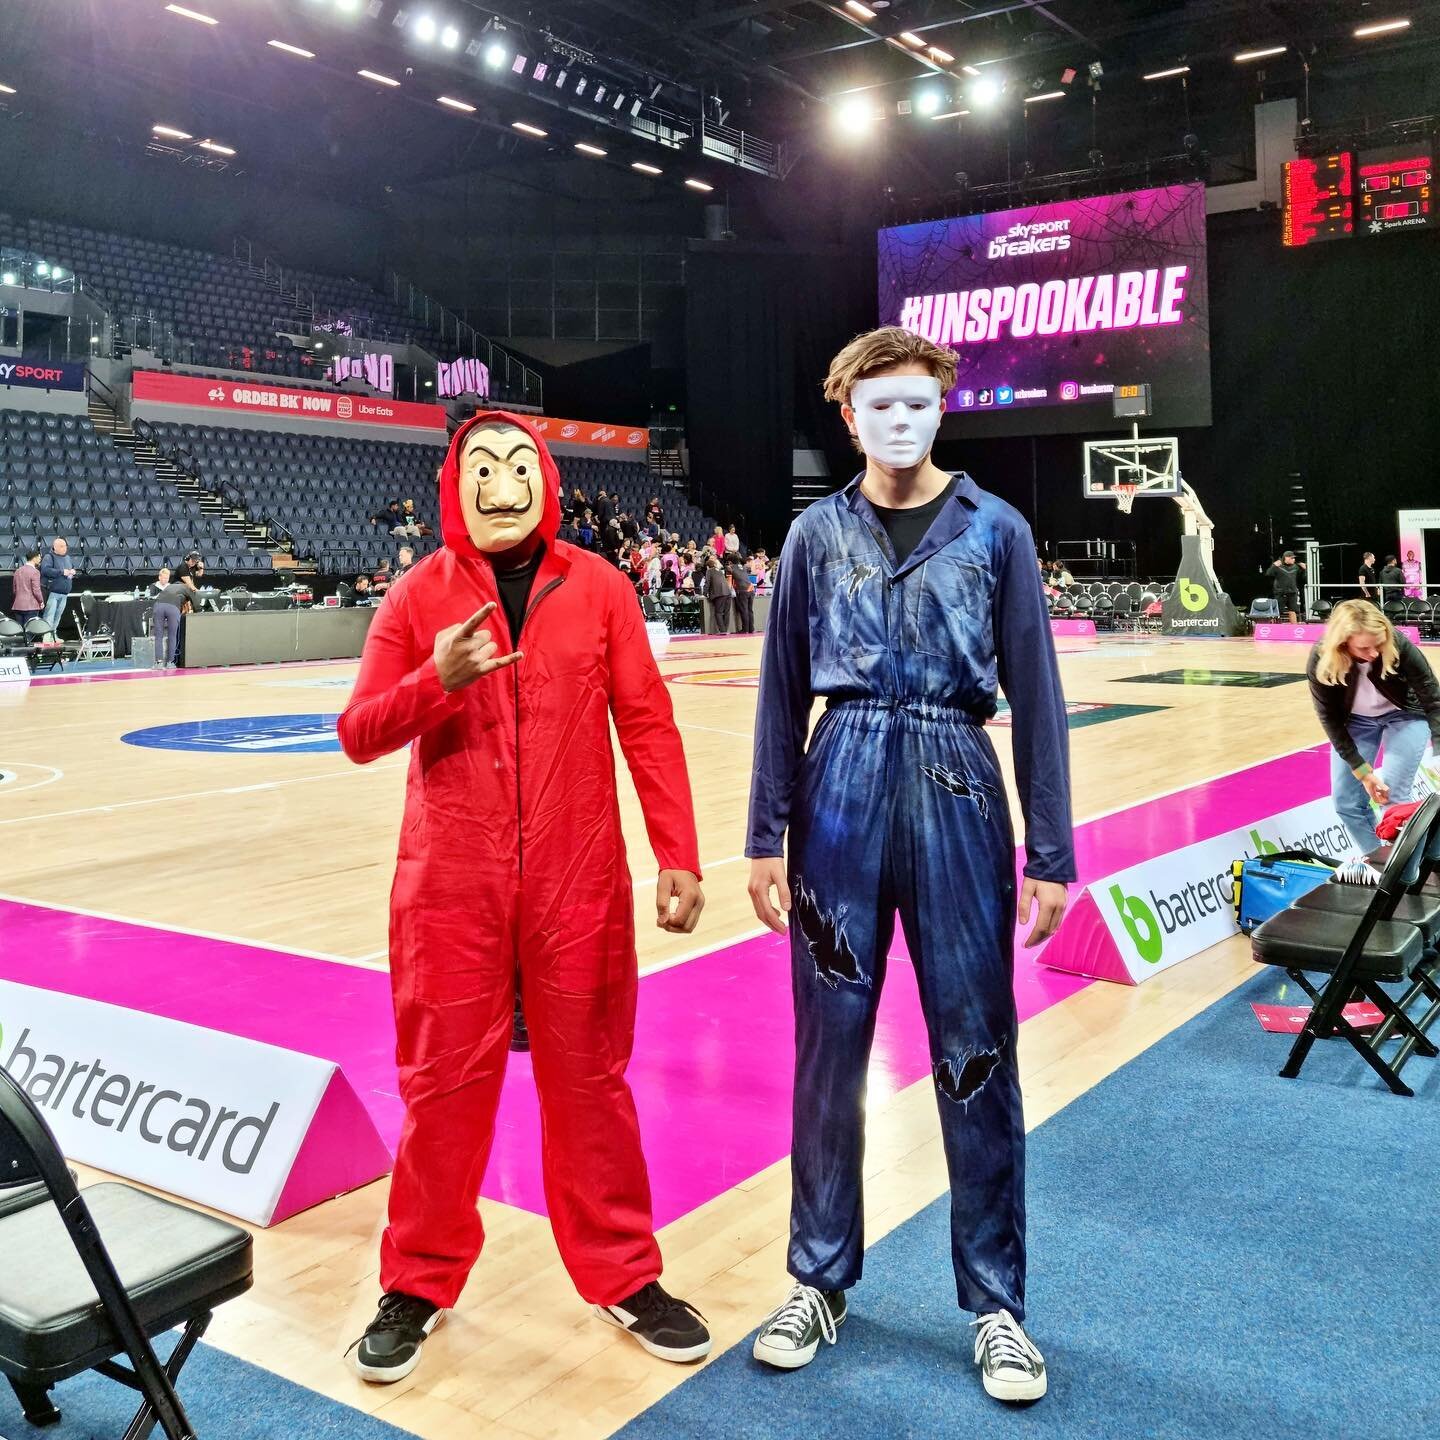 Unspookable at the @breakersnz last night! 
Did your dare get a photo with our team?
#halloween2022 #skysportbreakers #happyhalloween #unspookable #dressup